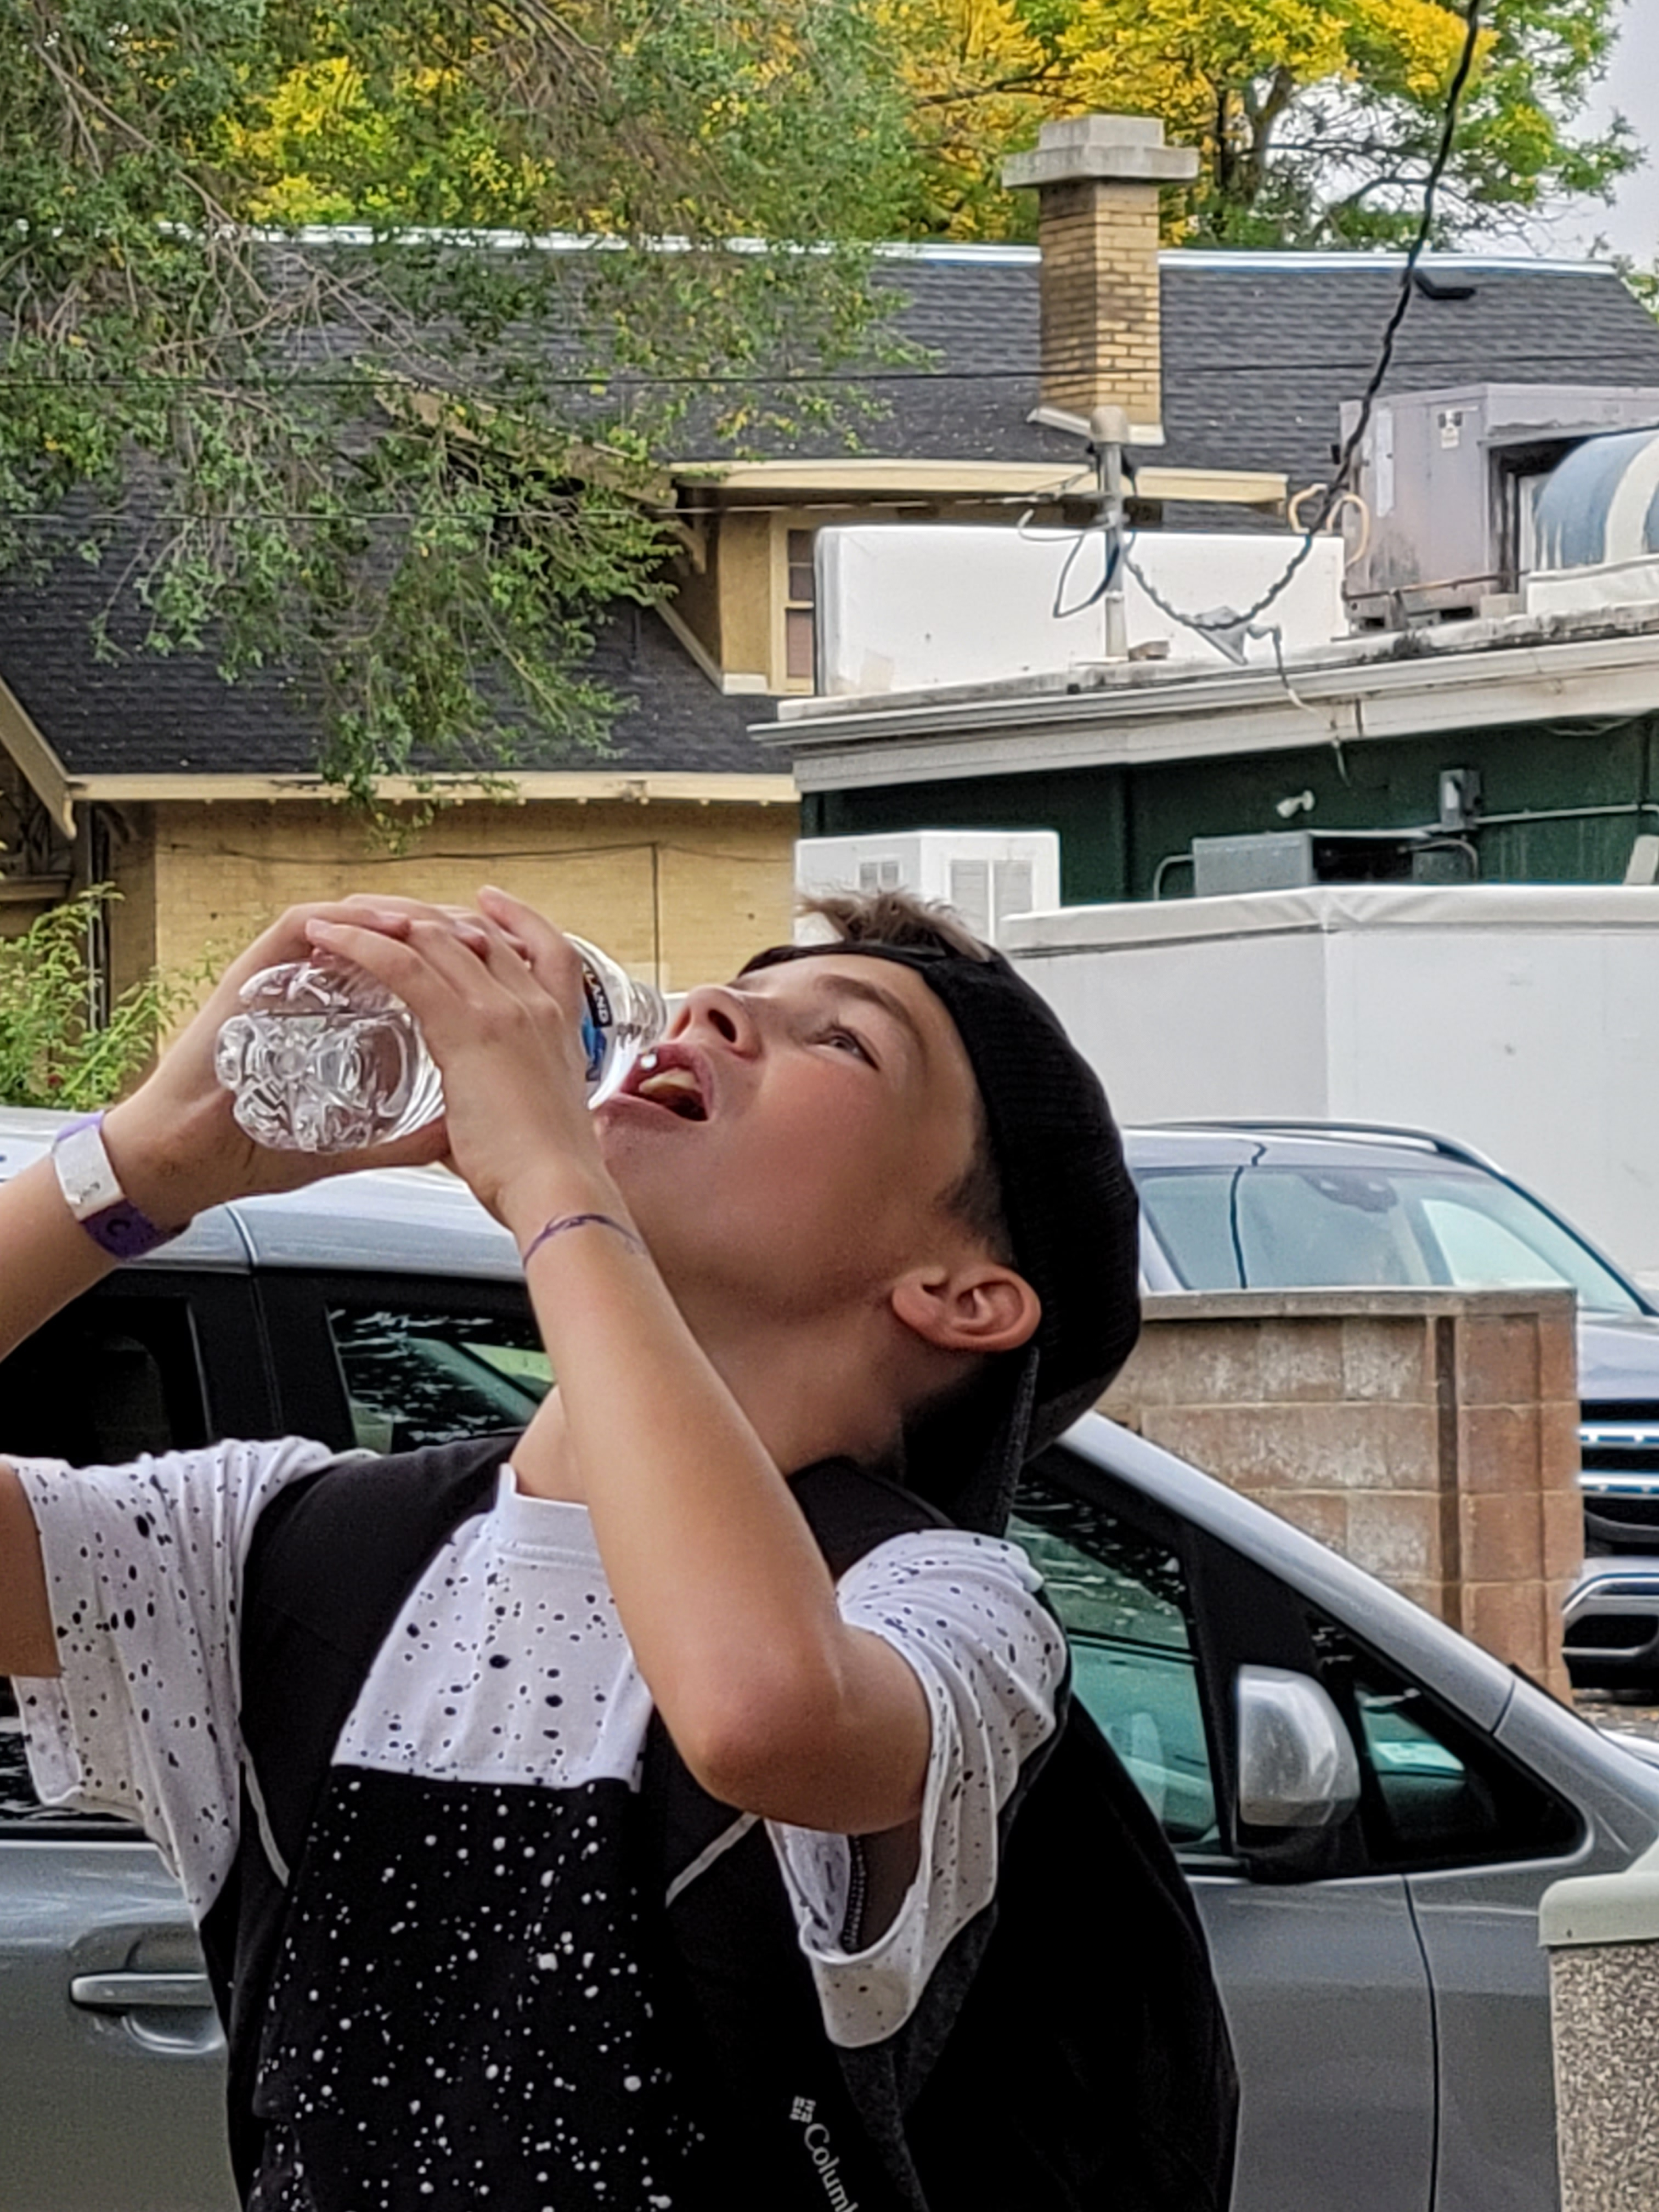 A student takes a drink during a walking field trip